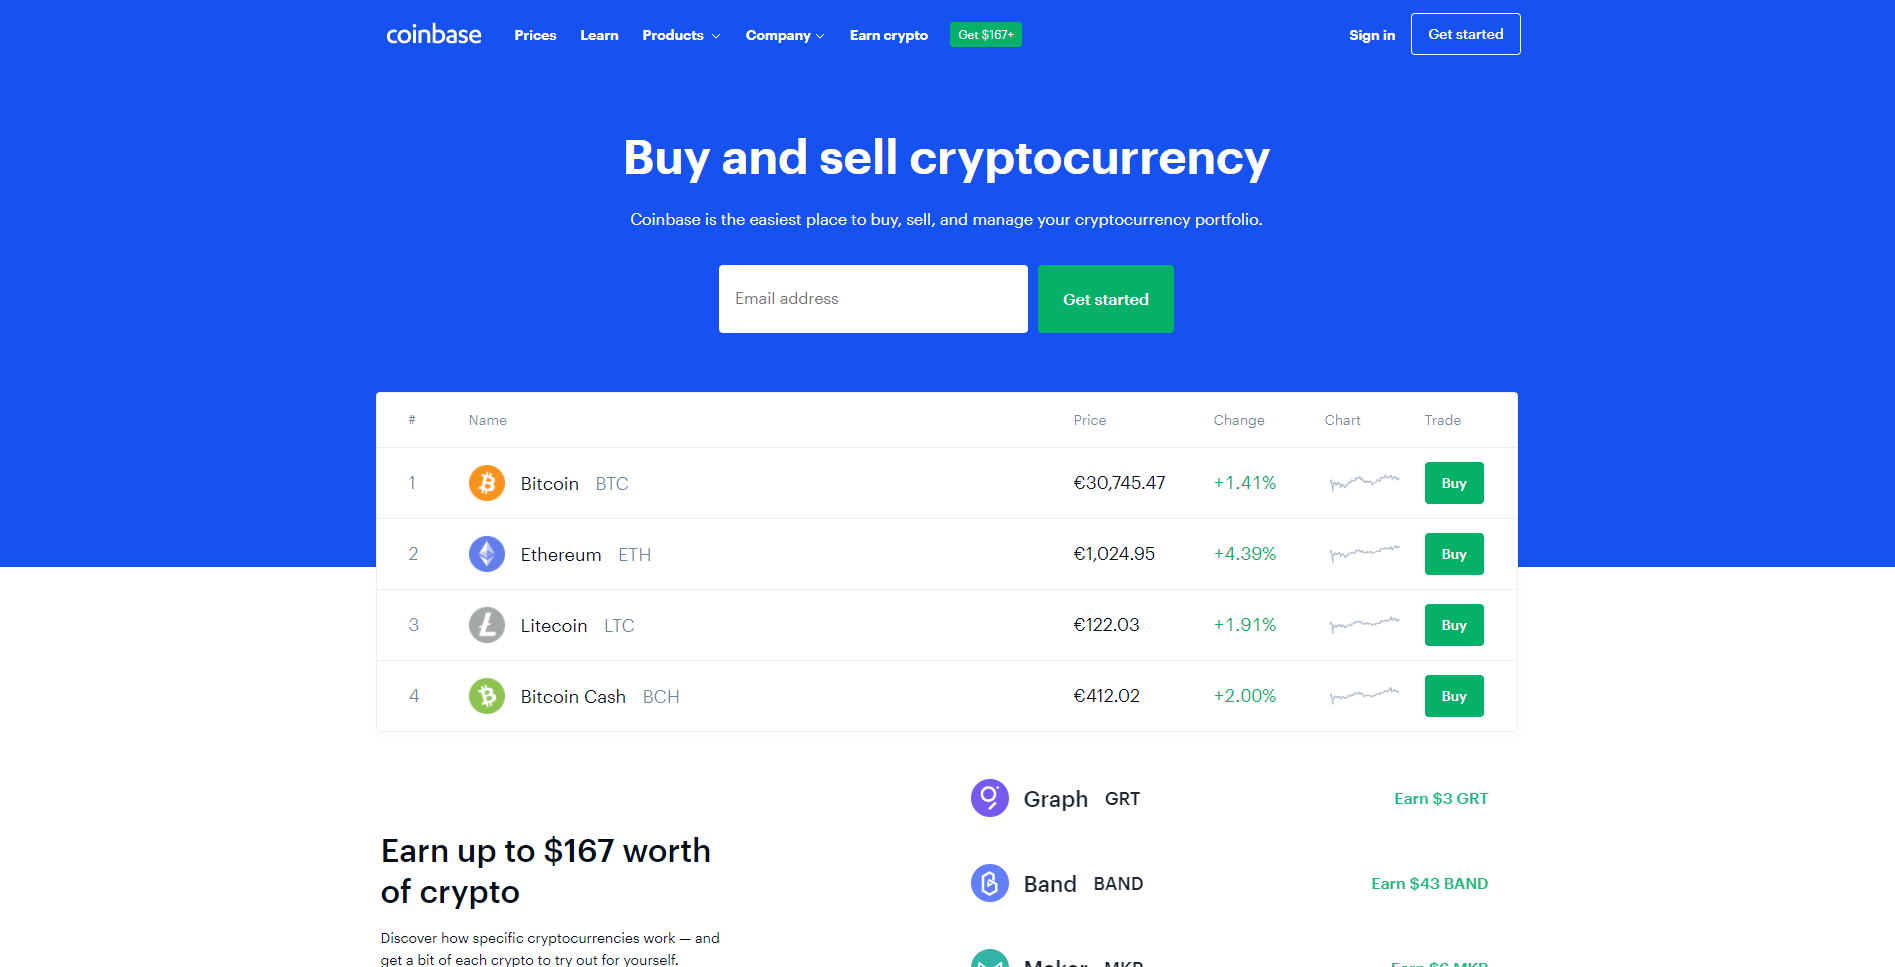 Official website of Coinbase